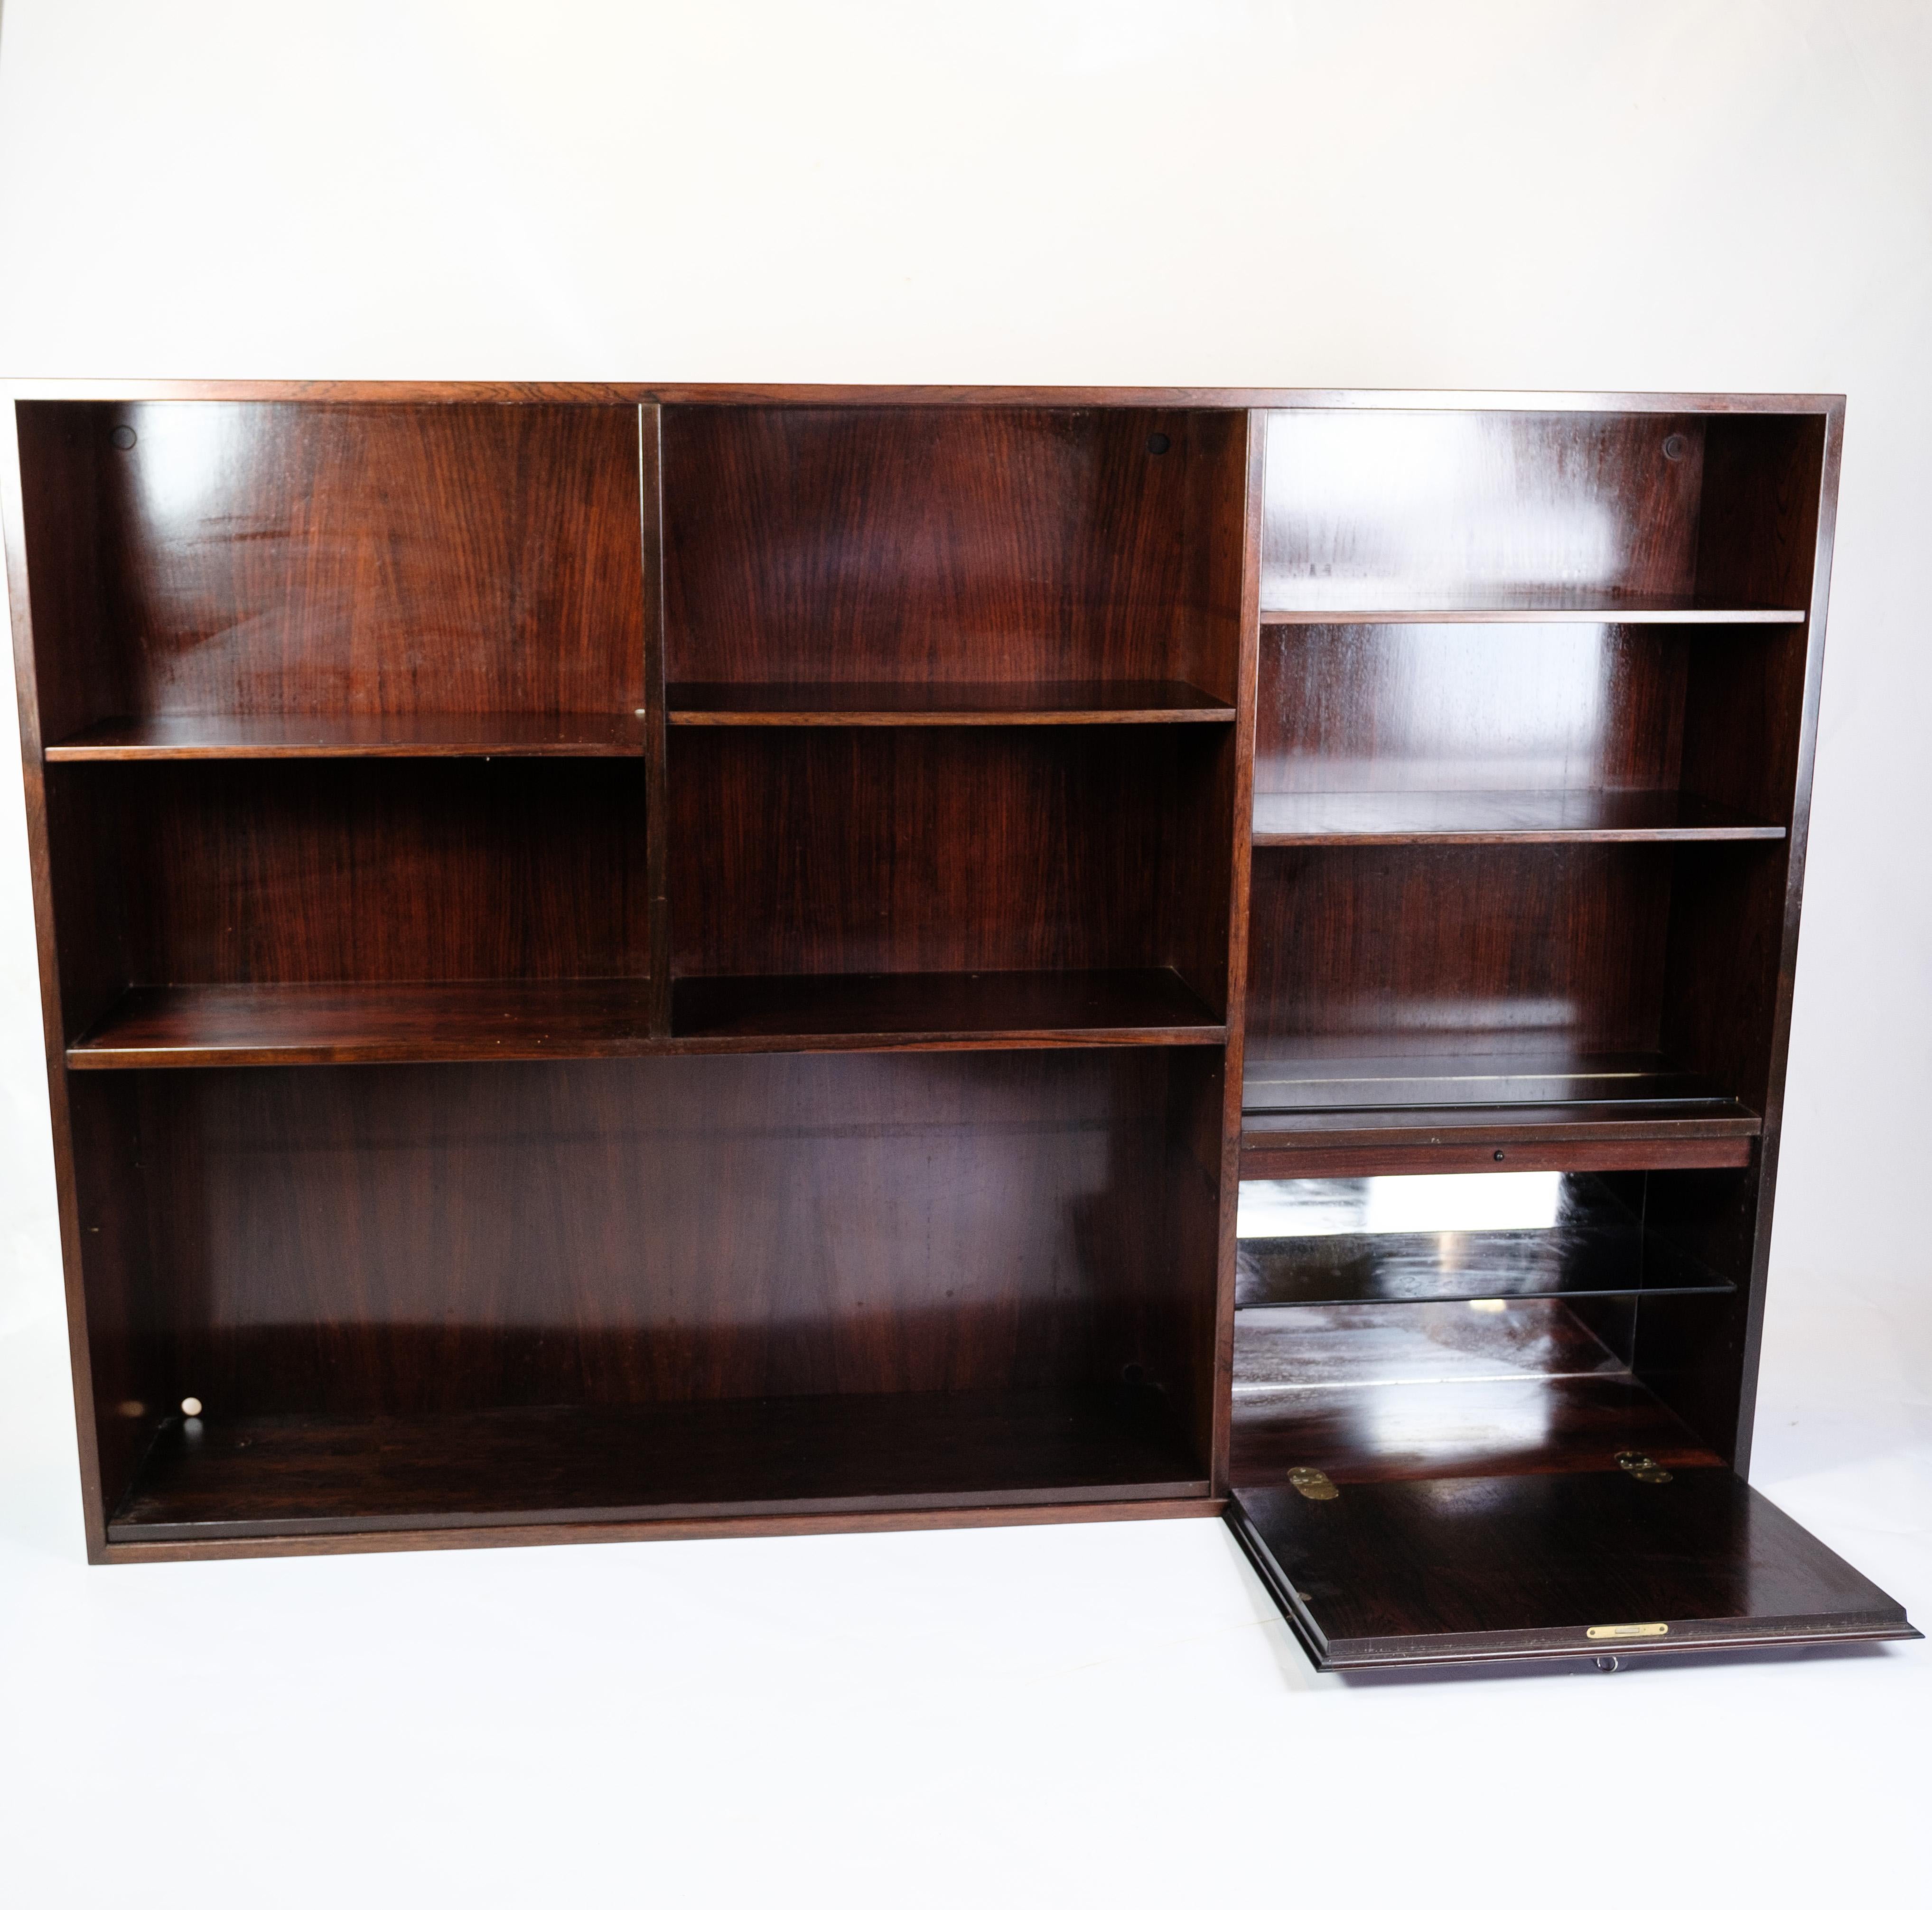 Bookcase Model 35 Made In Rosewood By Omann Jun. Furniture Factory From 1960s In Good Condition For Sale In Lejre, DK